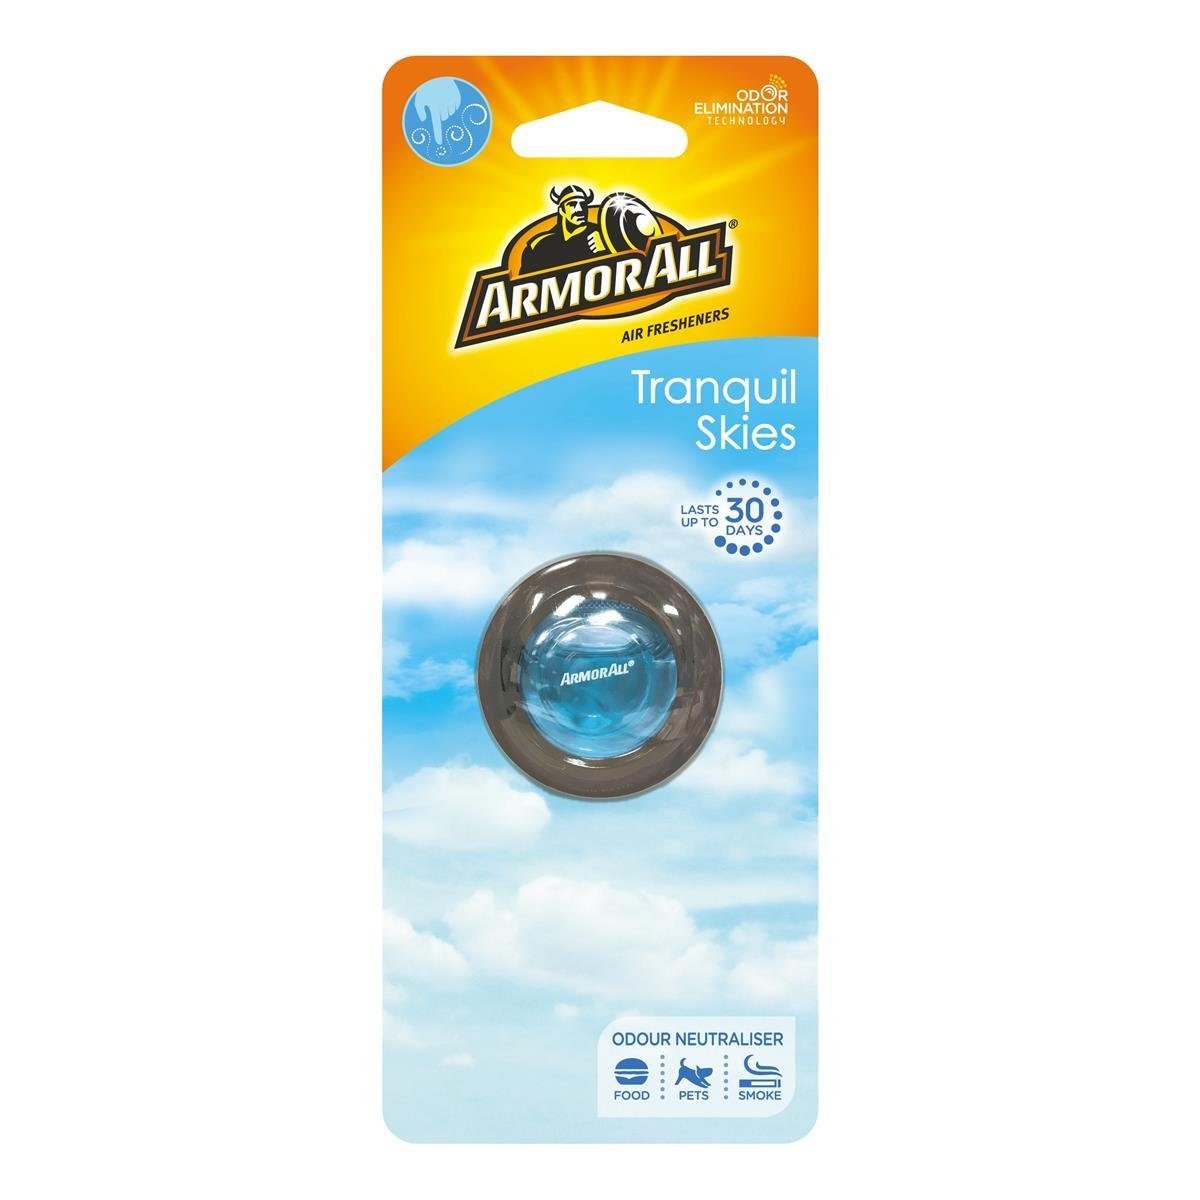 Armor All All Skies Armor Pack) Tranquil Fresheners (1er Air Raumduft 2,5ml